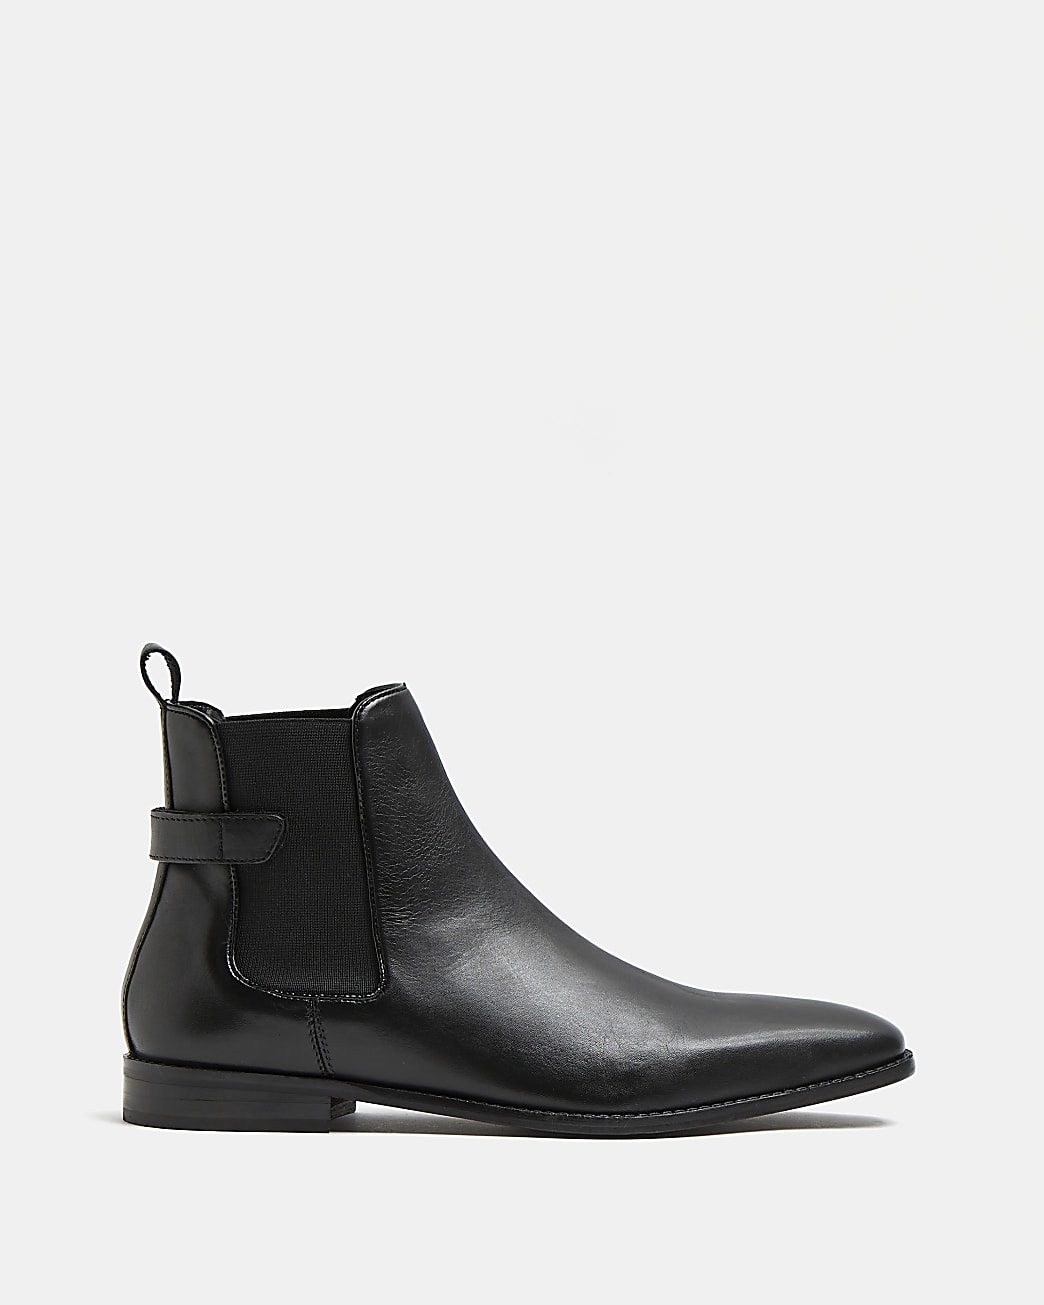 Black leather ankle strap Chelsea boots